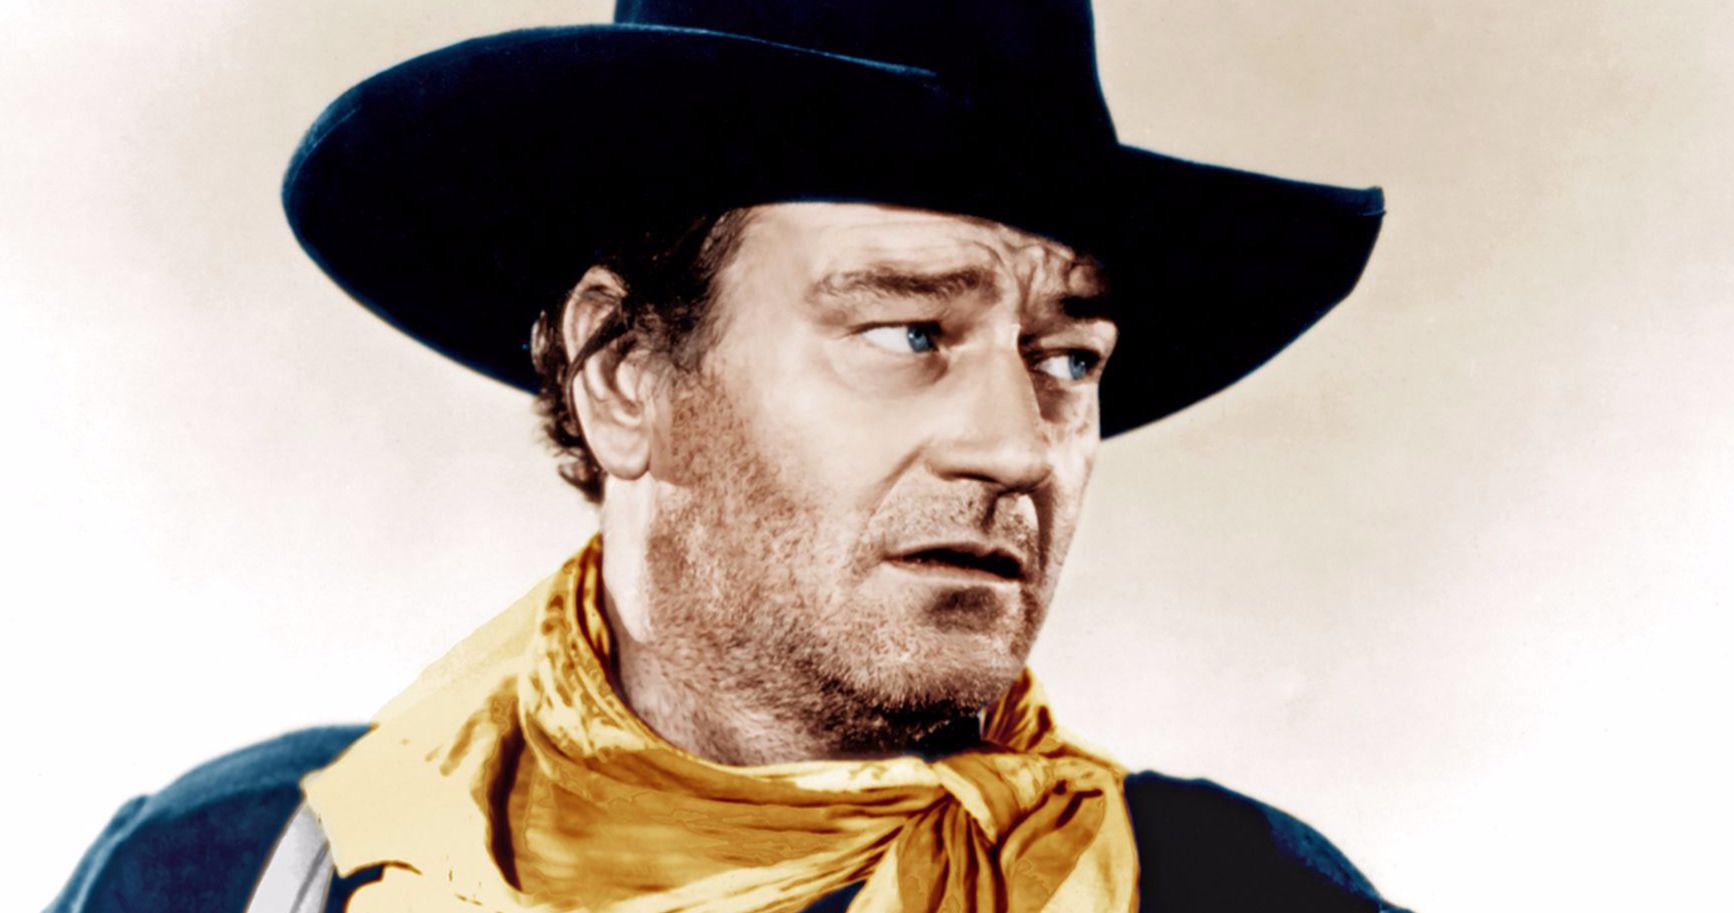 John Wayne Legacy Denounced by USC Students Who Want Exhibit Removed